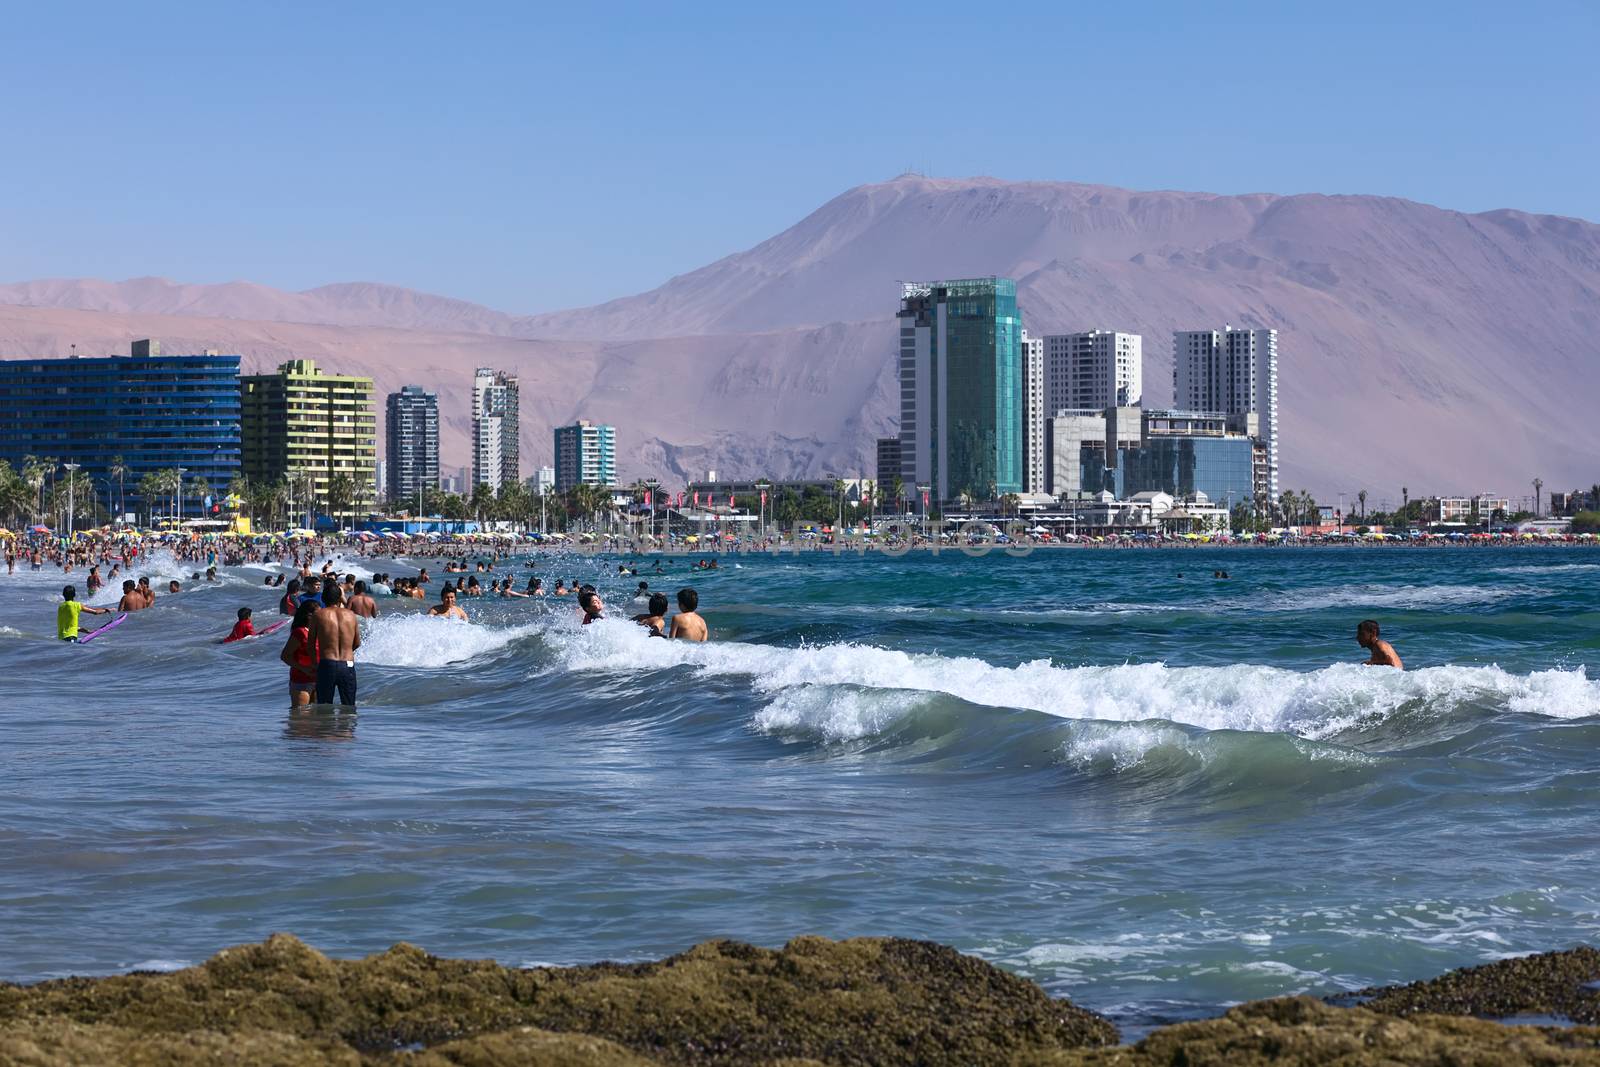 Cavancha Beach in Iquique, Chile by sven